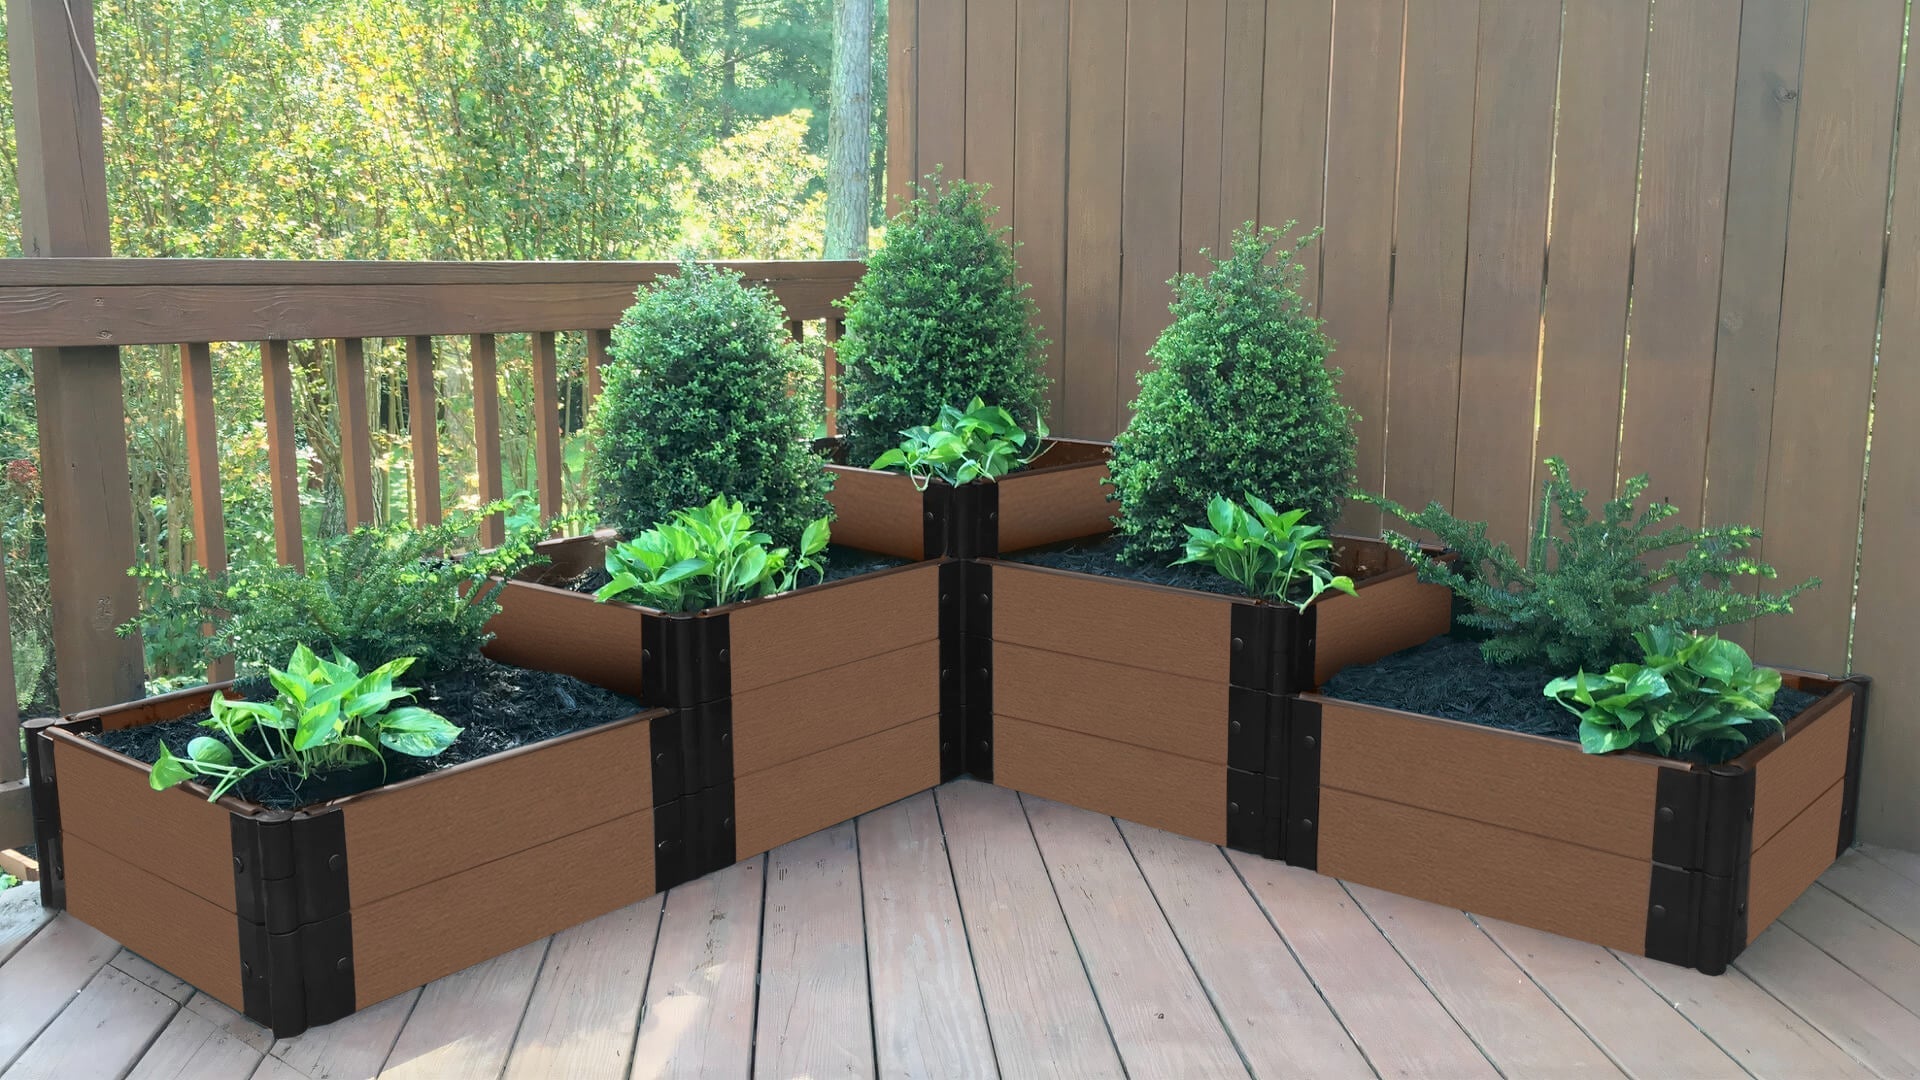 'Yosemite Falls' - 6' x 6' Terrace Garden Raised Bed (Triple Tier) Raised Bed Planters Frame It All Uptown Brown 1